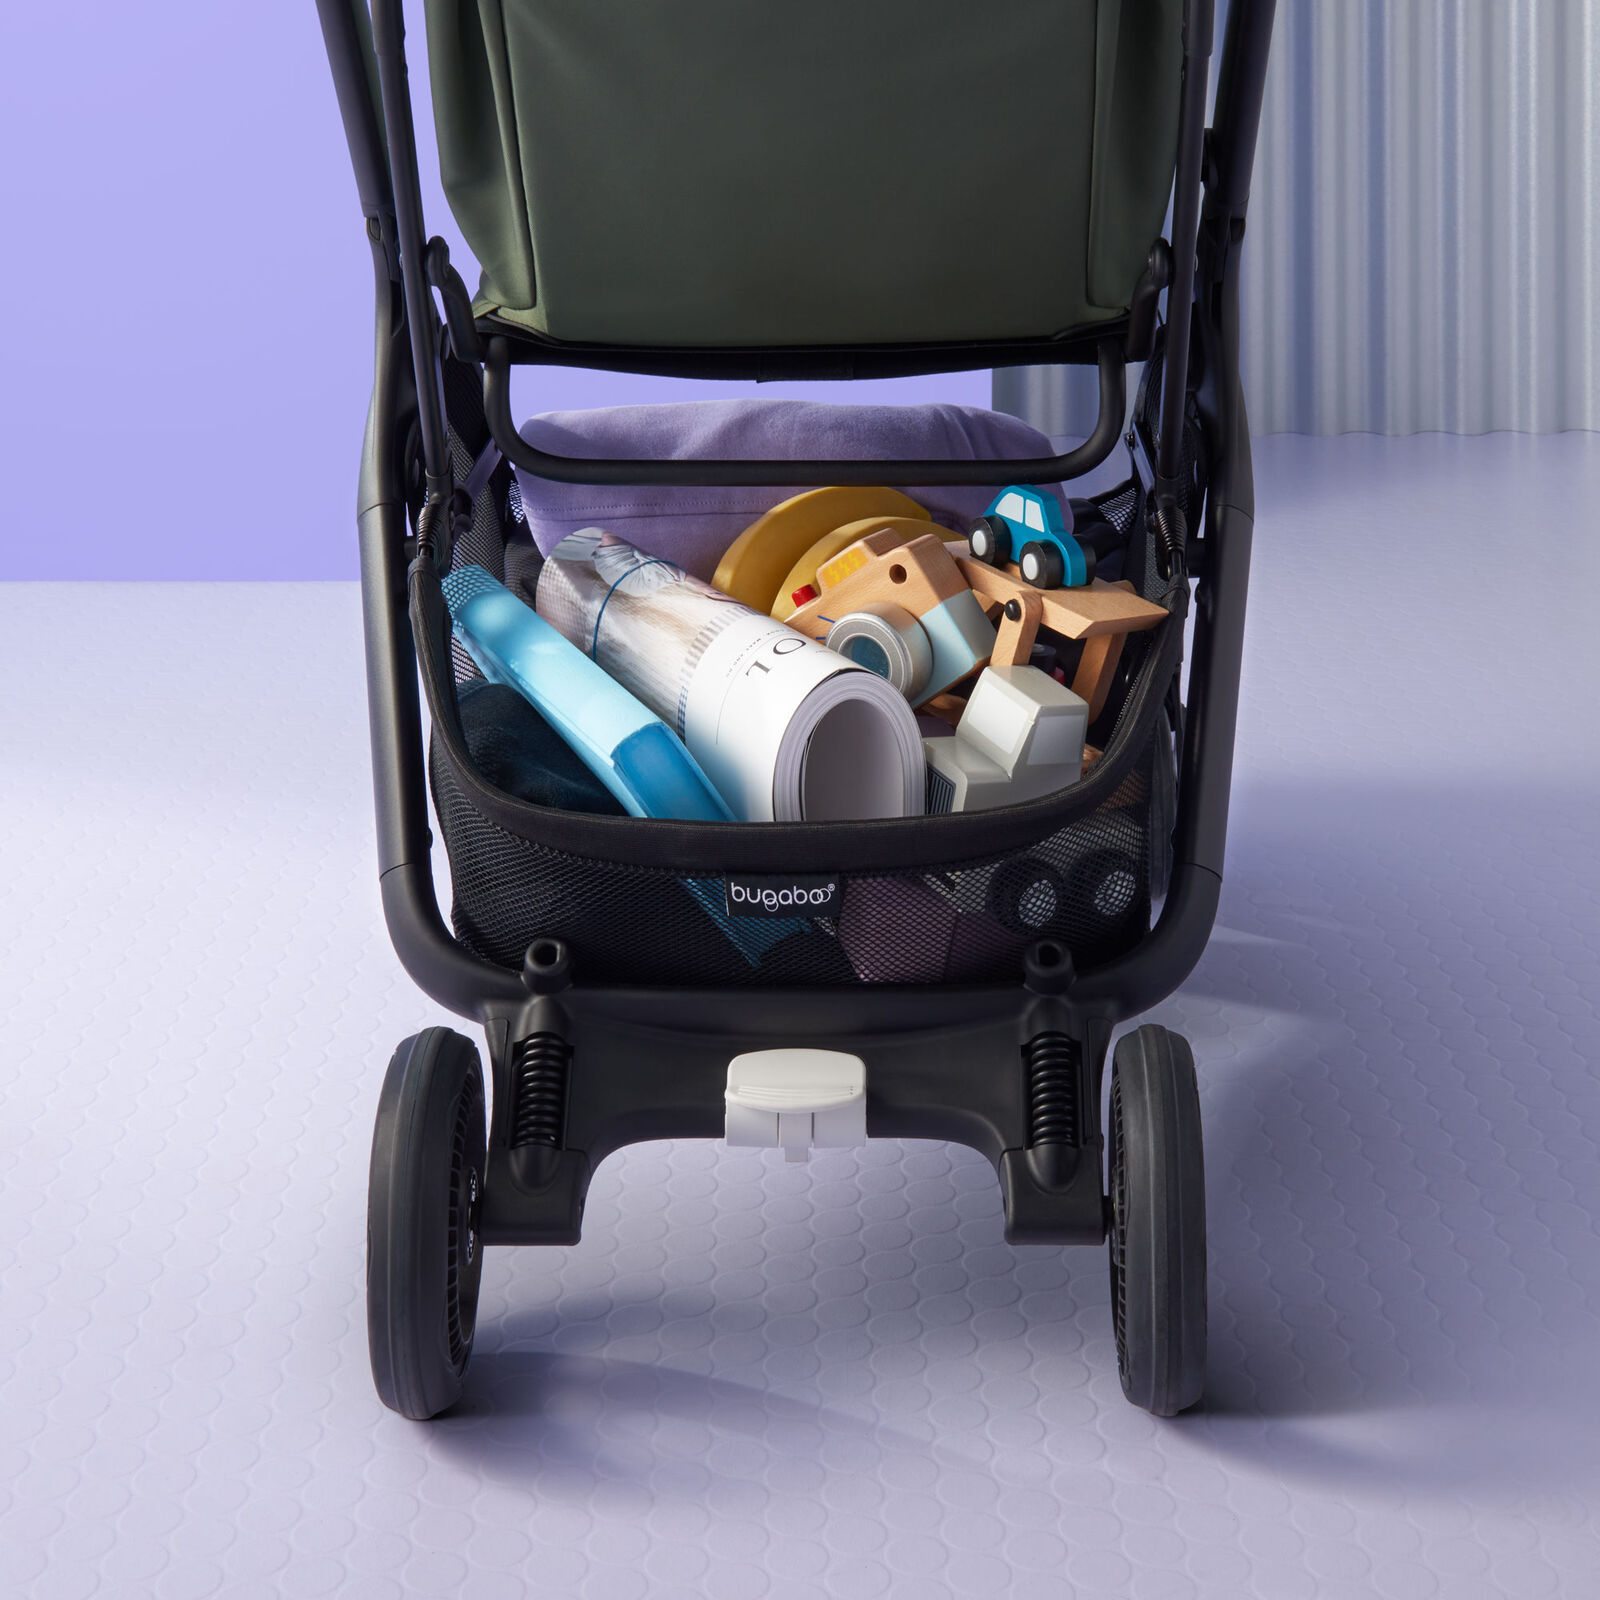 Bugaboo Butterfly seat pram - View 5